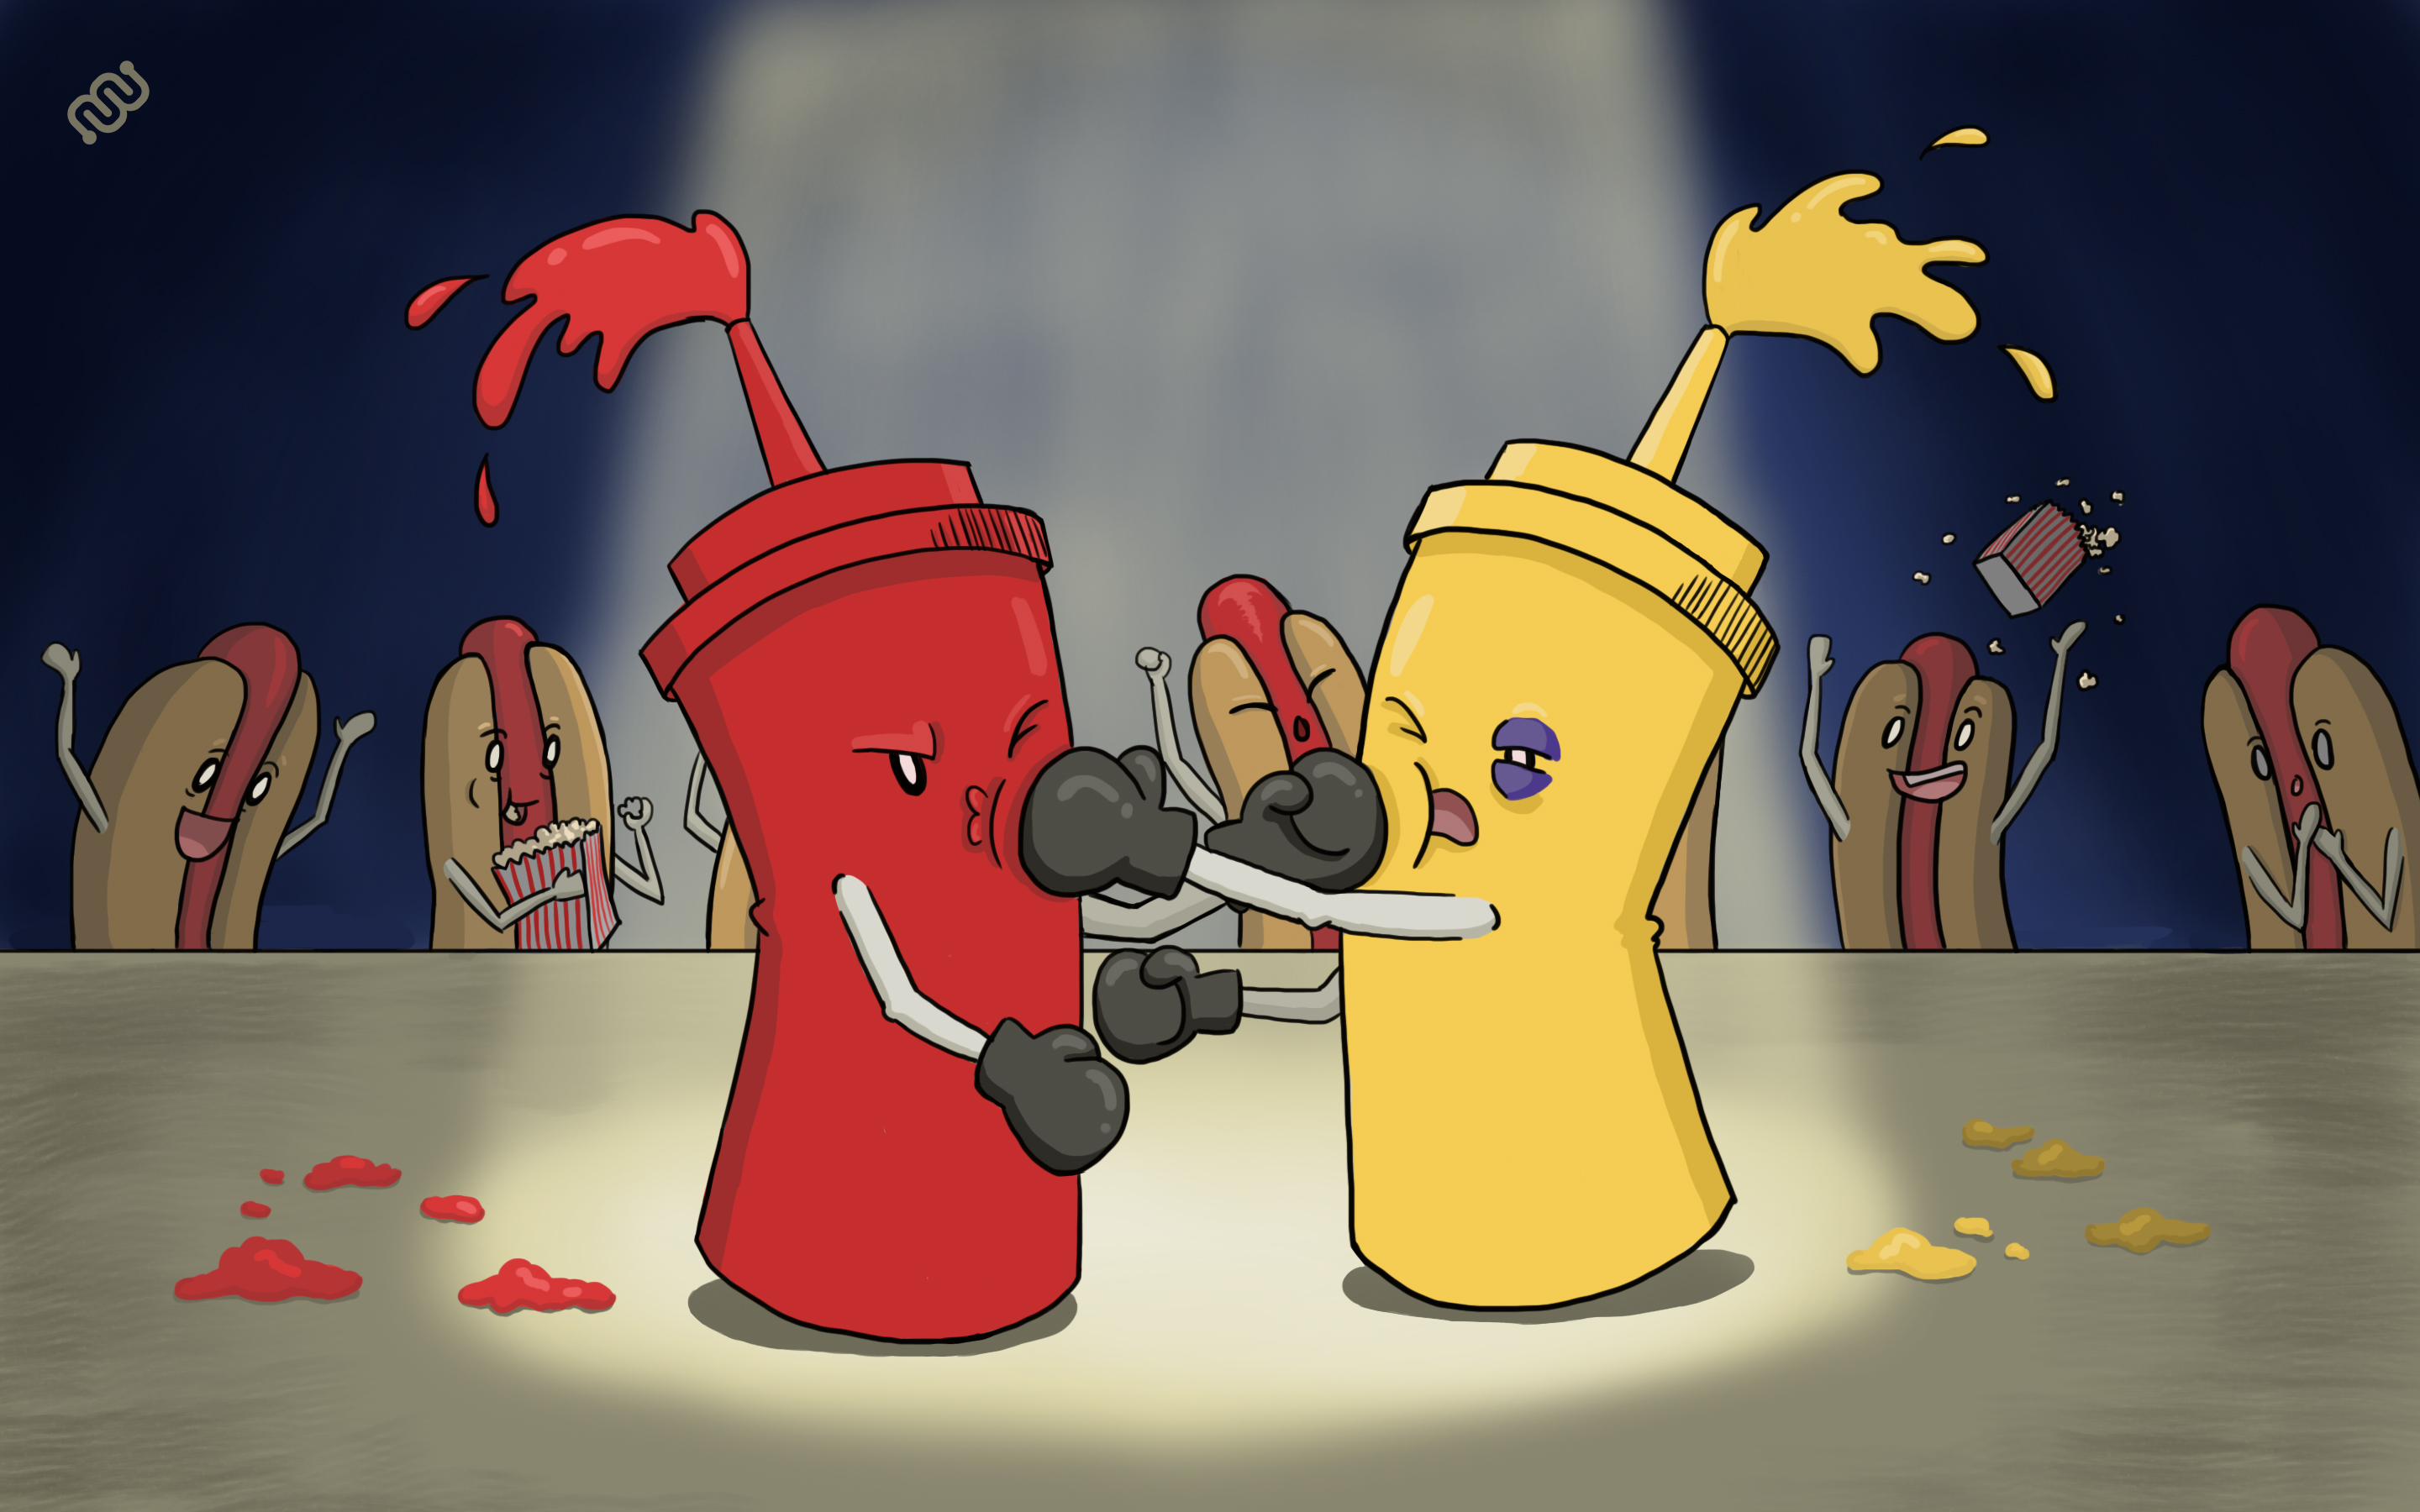 Battle of the condiments